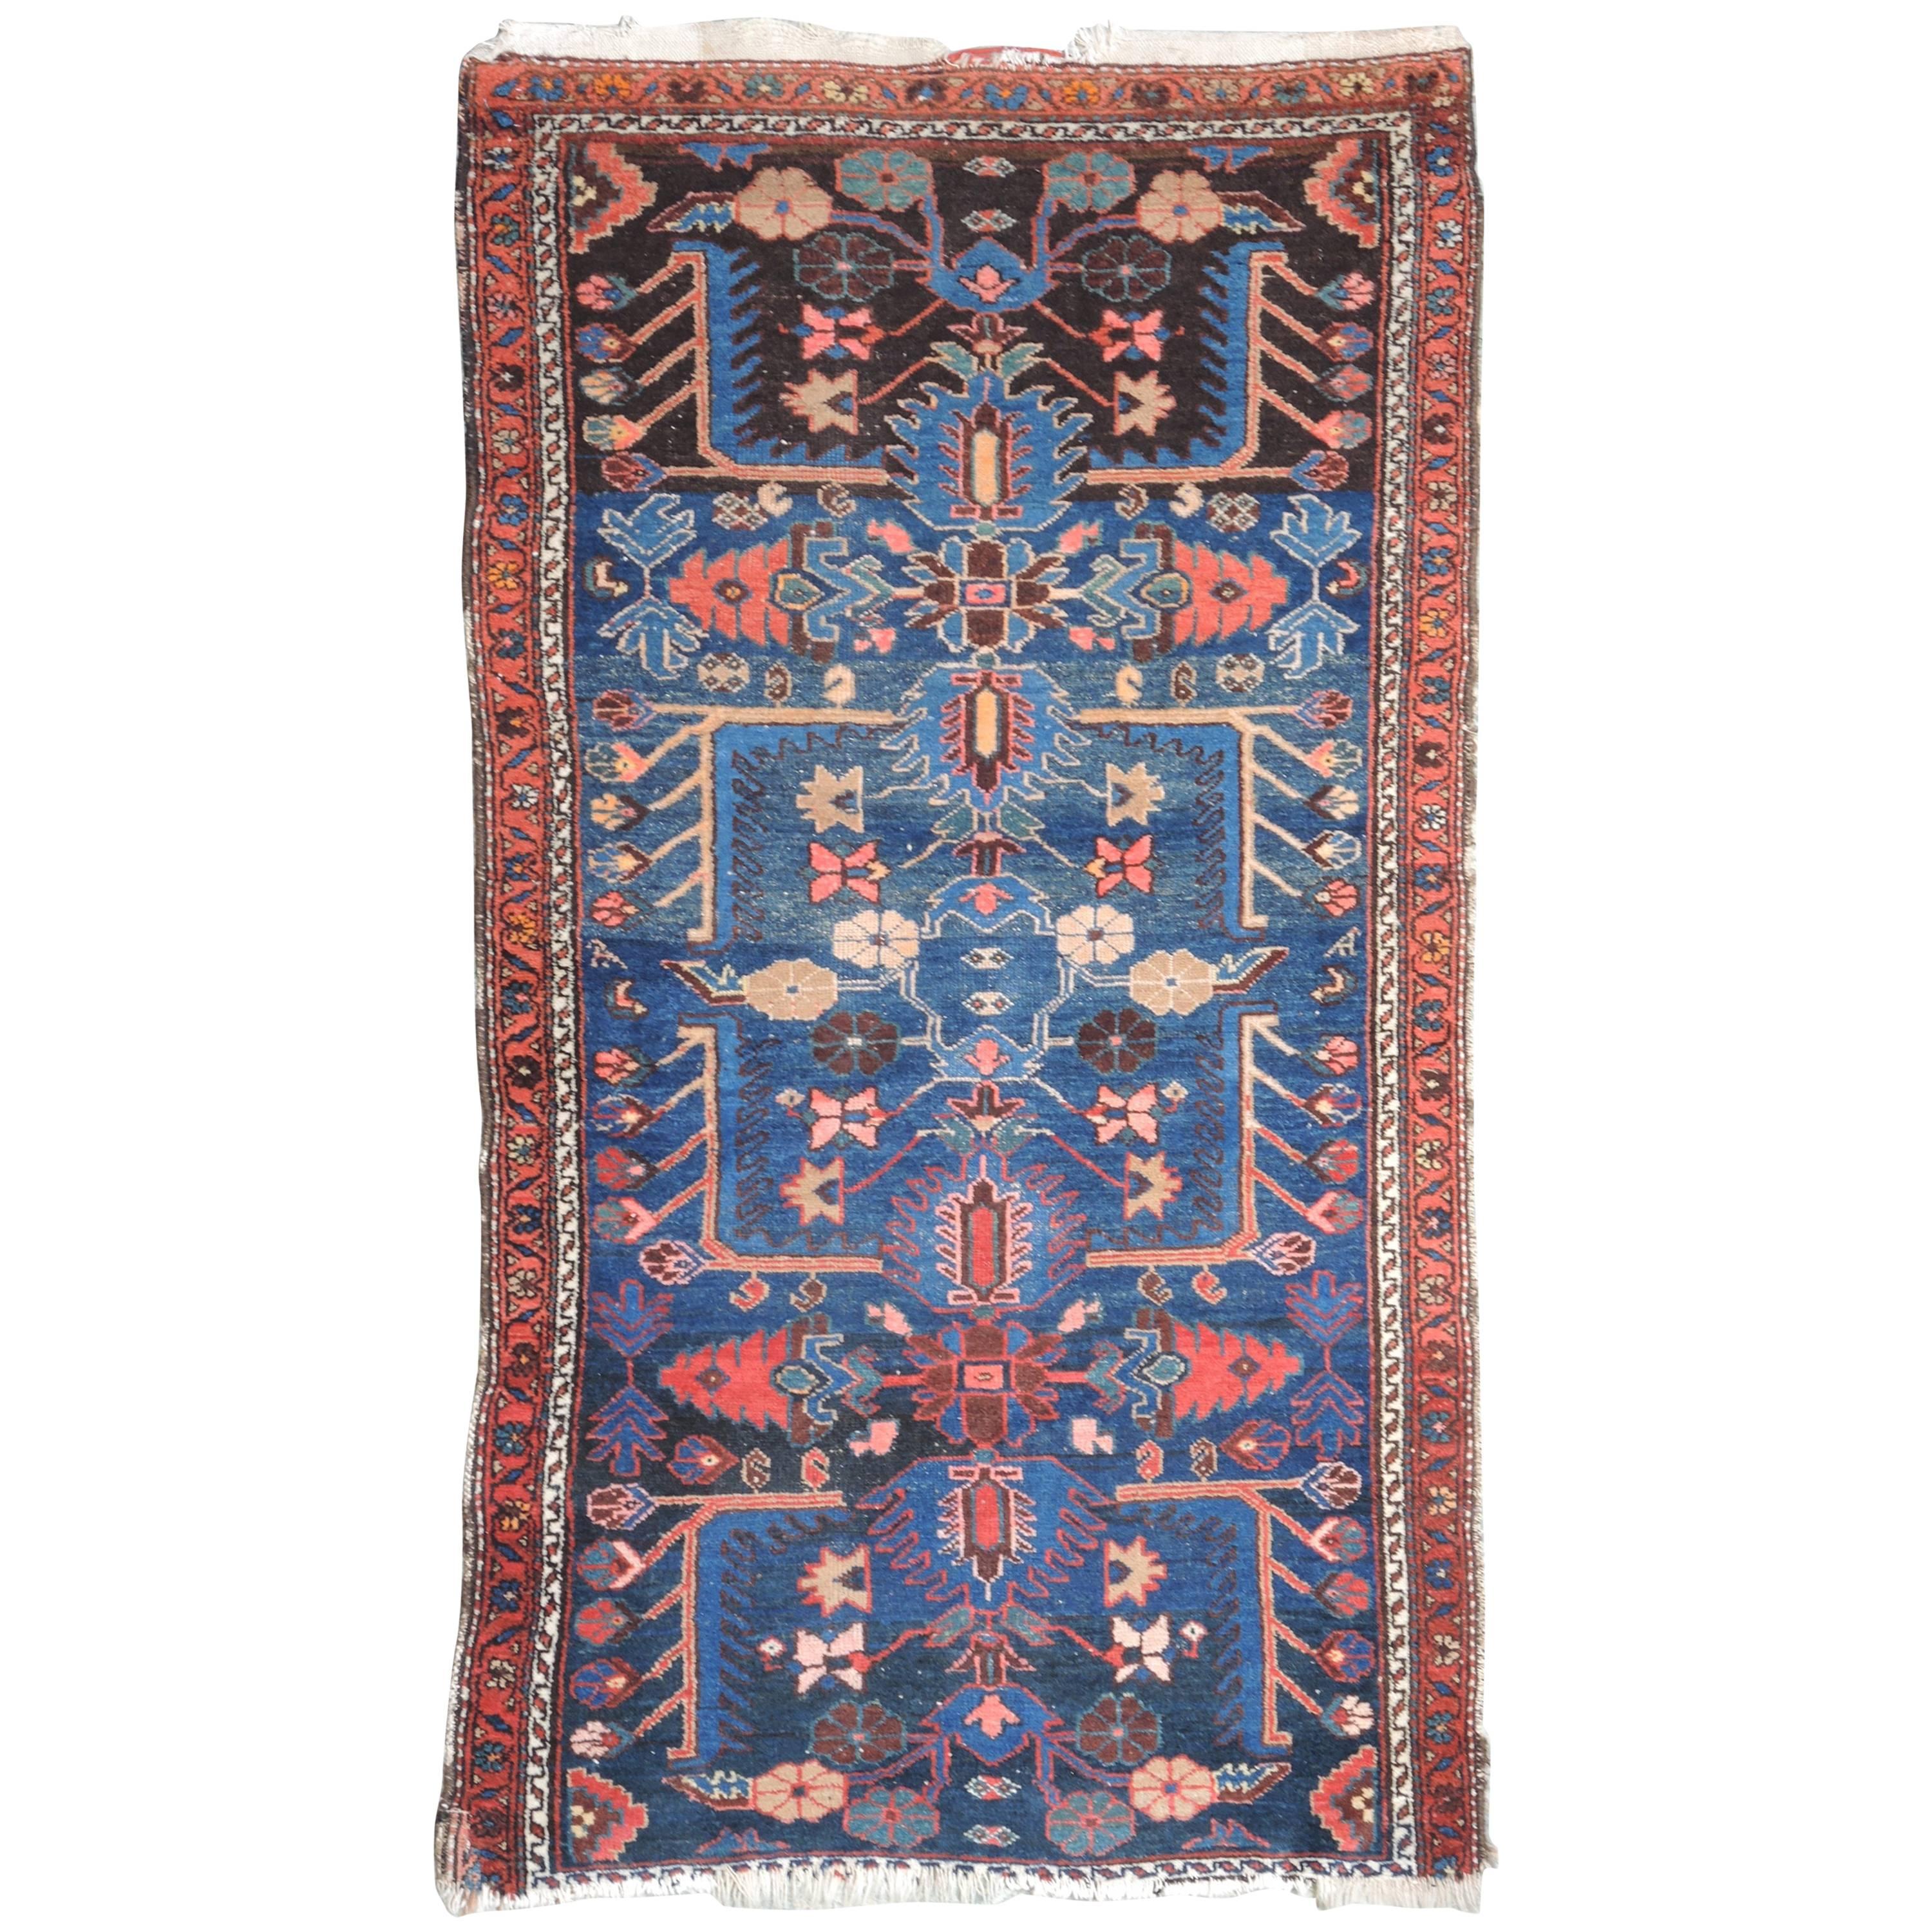 Small Persian Carpet in Deep Blue and Wine Colors, circa 1900